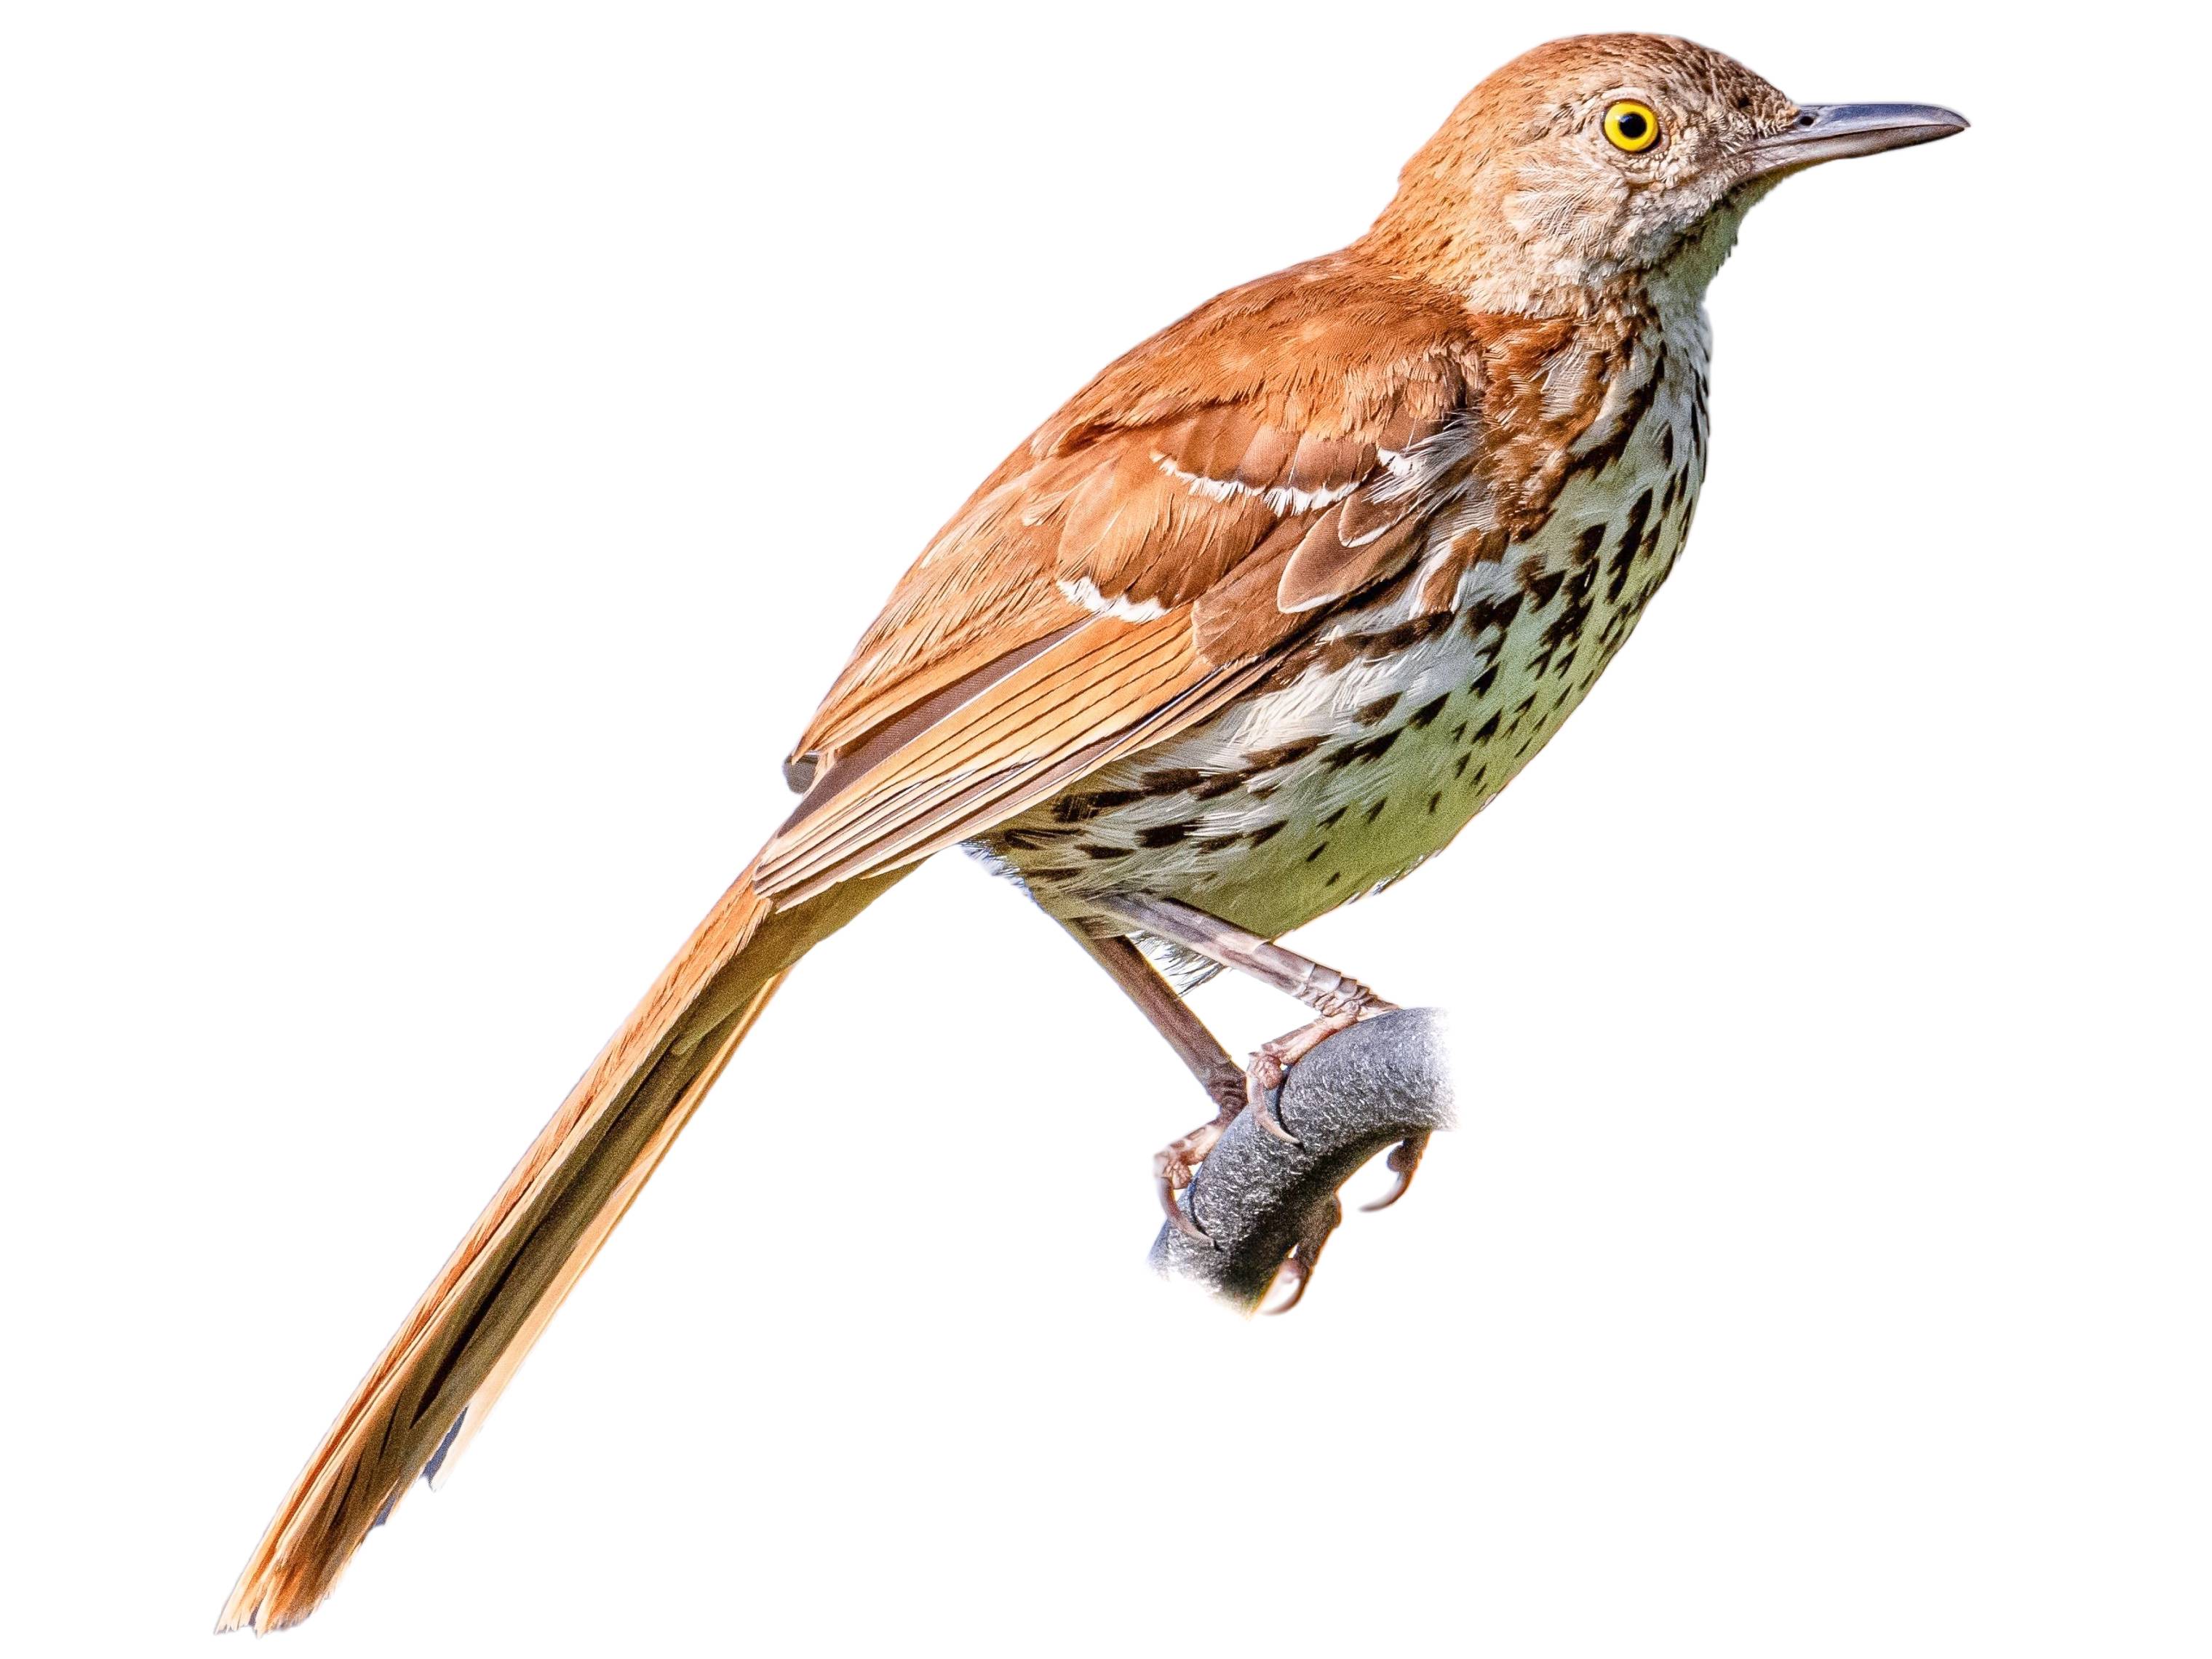 A photo of a Brown Thrasher (Toxostoma rufum)